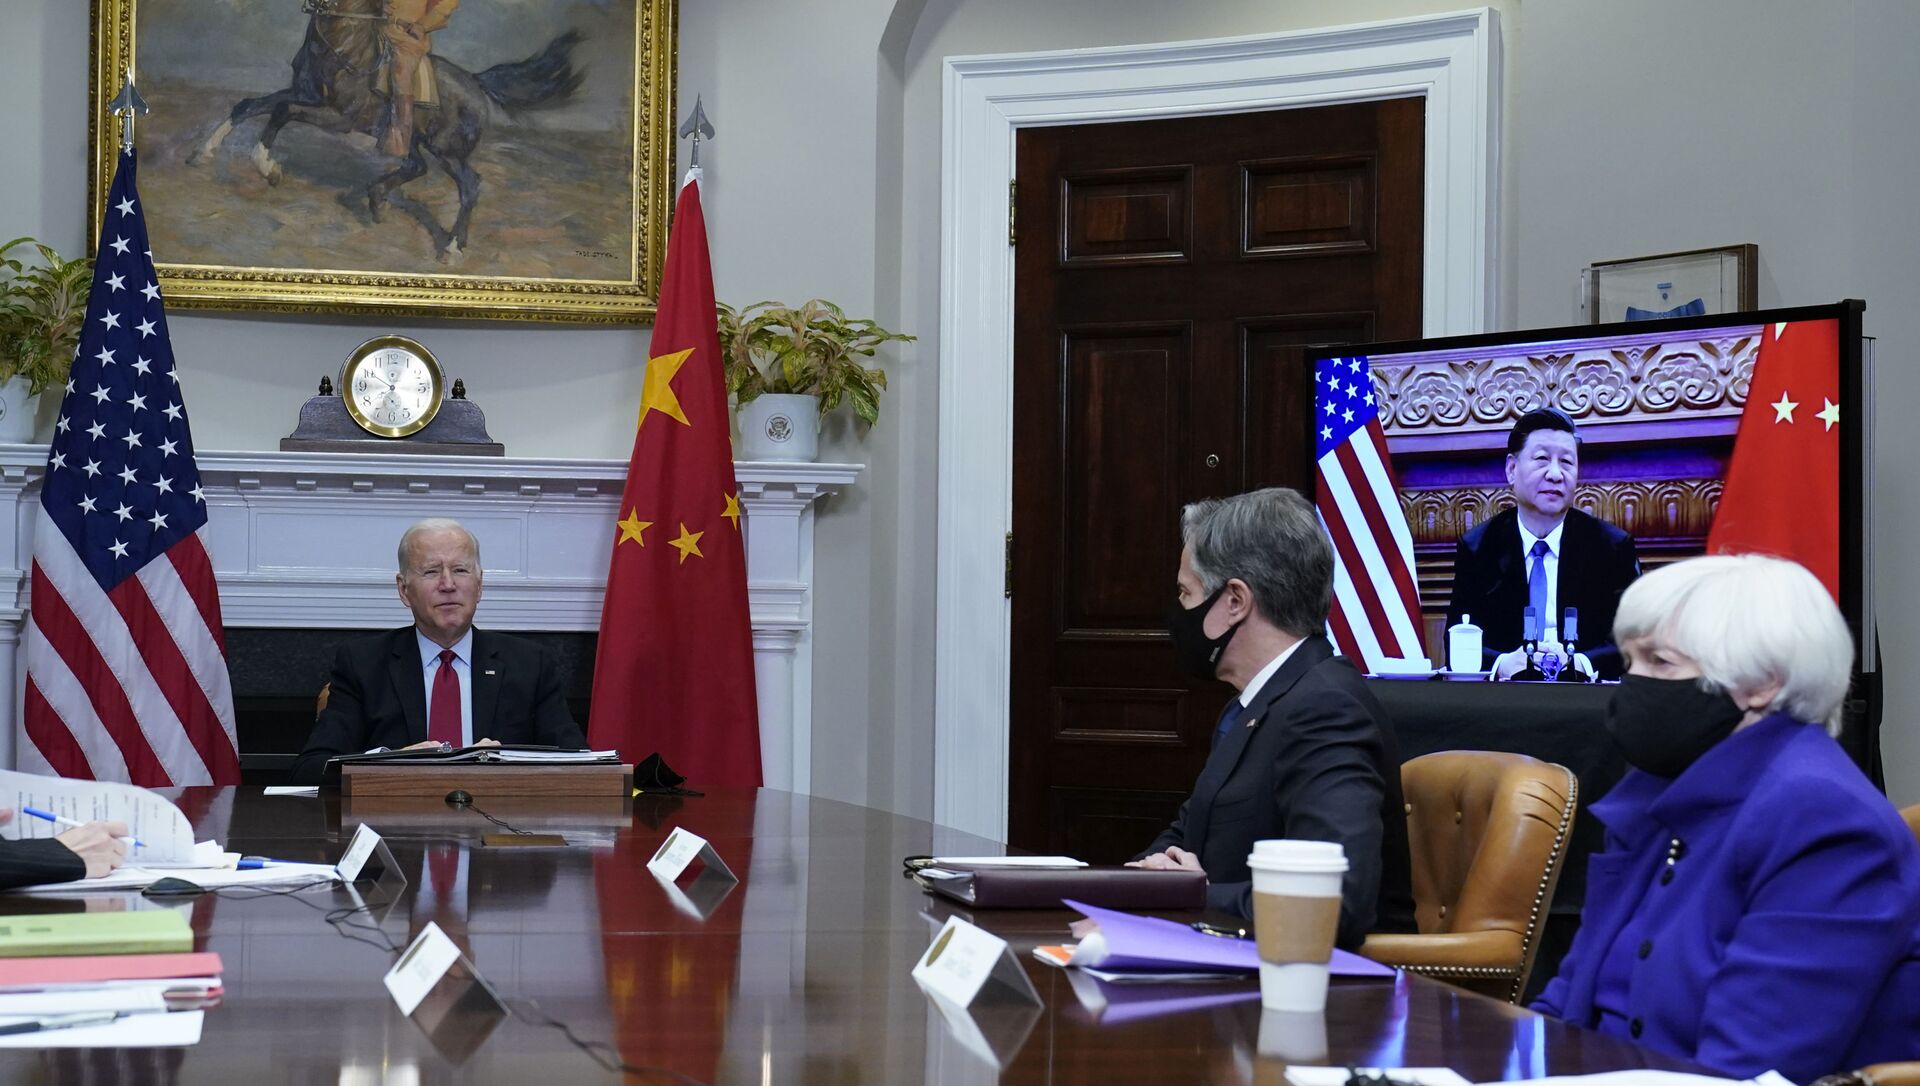 FILE - President Joe Biden speaks as he meets virtually with Chinese President Xi Jinping from the Roosevelt Room of the White House in Washington, Nov. 15, 2021. . Secretary of State Antony Blinken, center, and Treasury Secretary Janet Yellen, right, also participated in the meeting,  The Biden administration has invited Taiwan to its upcoming Summit for Democracy, prompting sharp criticism from China, which considers the self-ruled island as its territory. The invitation list features 110 countries, including Taiwan, but does not include China or Russia.  (AP Photo/Susan Walsh, File) - 俄羅斯衛星通訊社, 1920, 25.11.2021